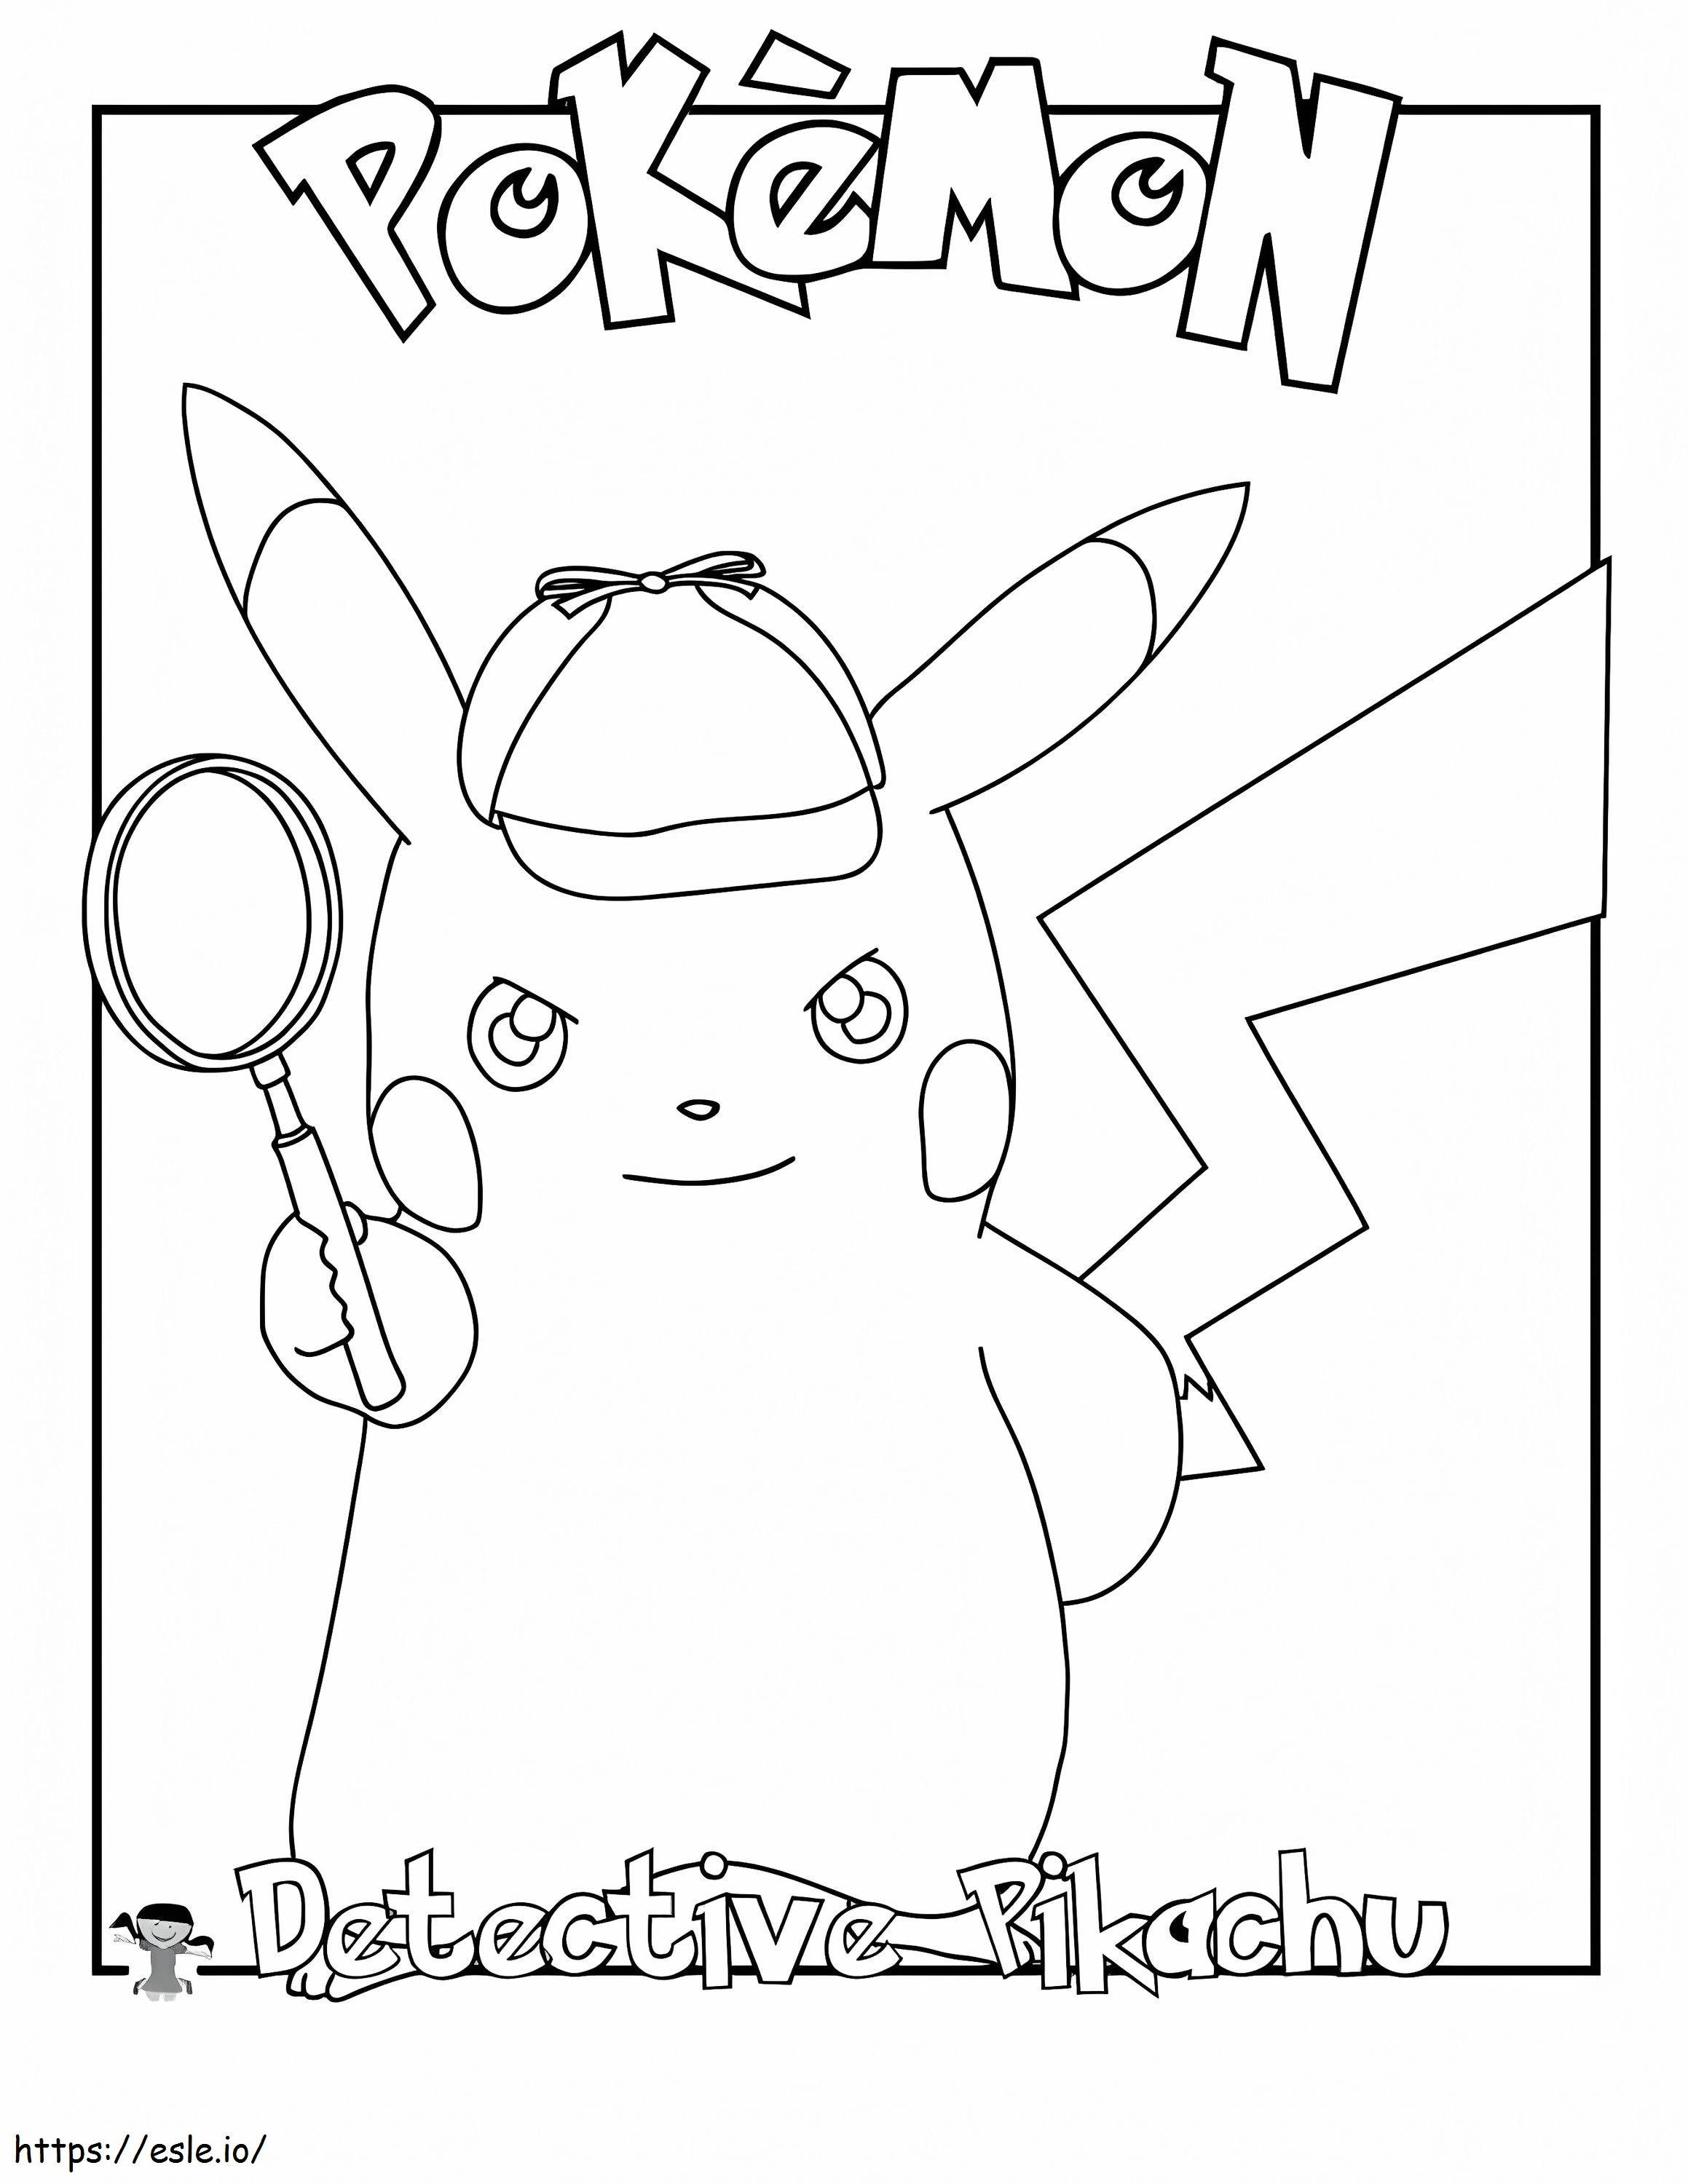 Genial Detective Pikachu coloring page